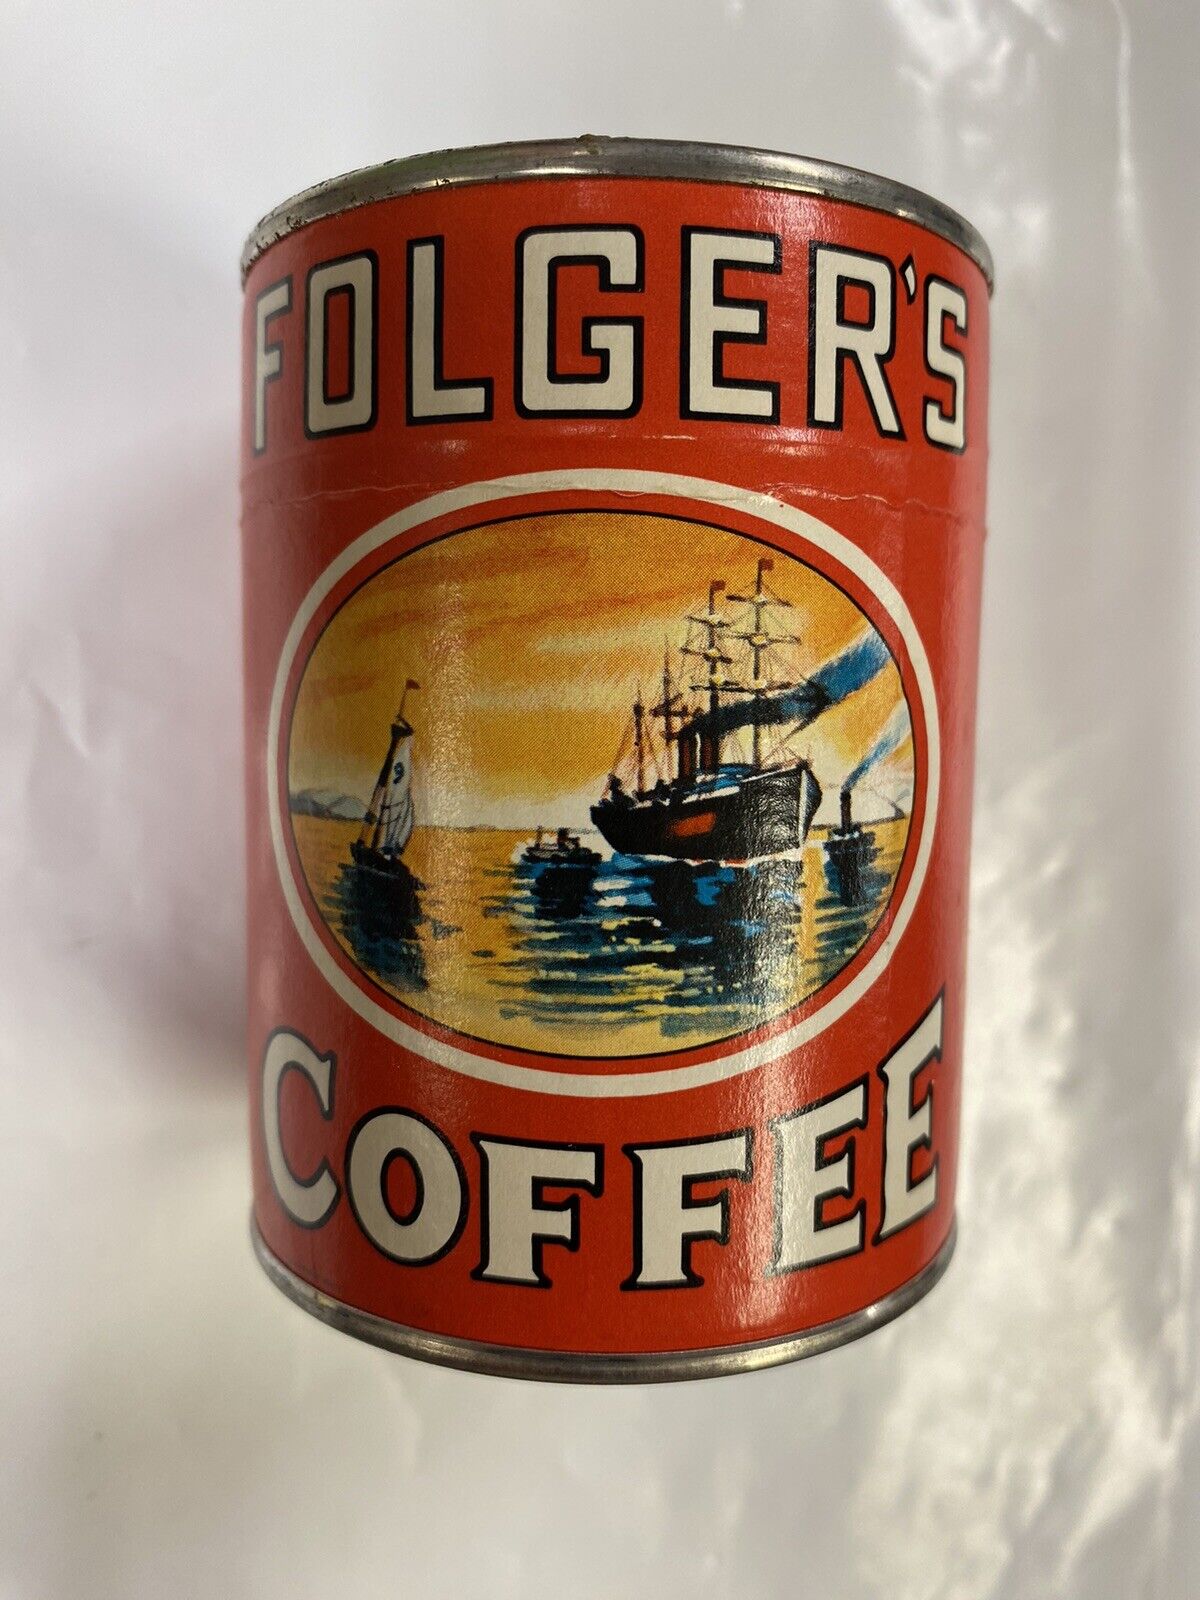 Vintage Folgers Coffee Can Puzzle 1980's Sealed Unopened Home Decor